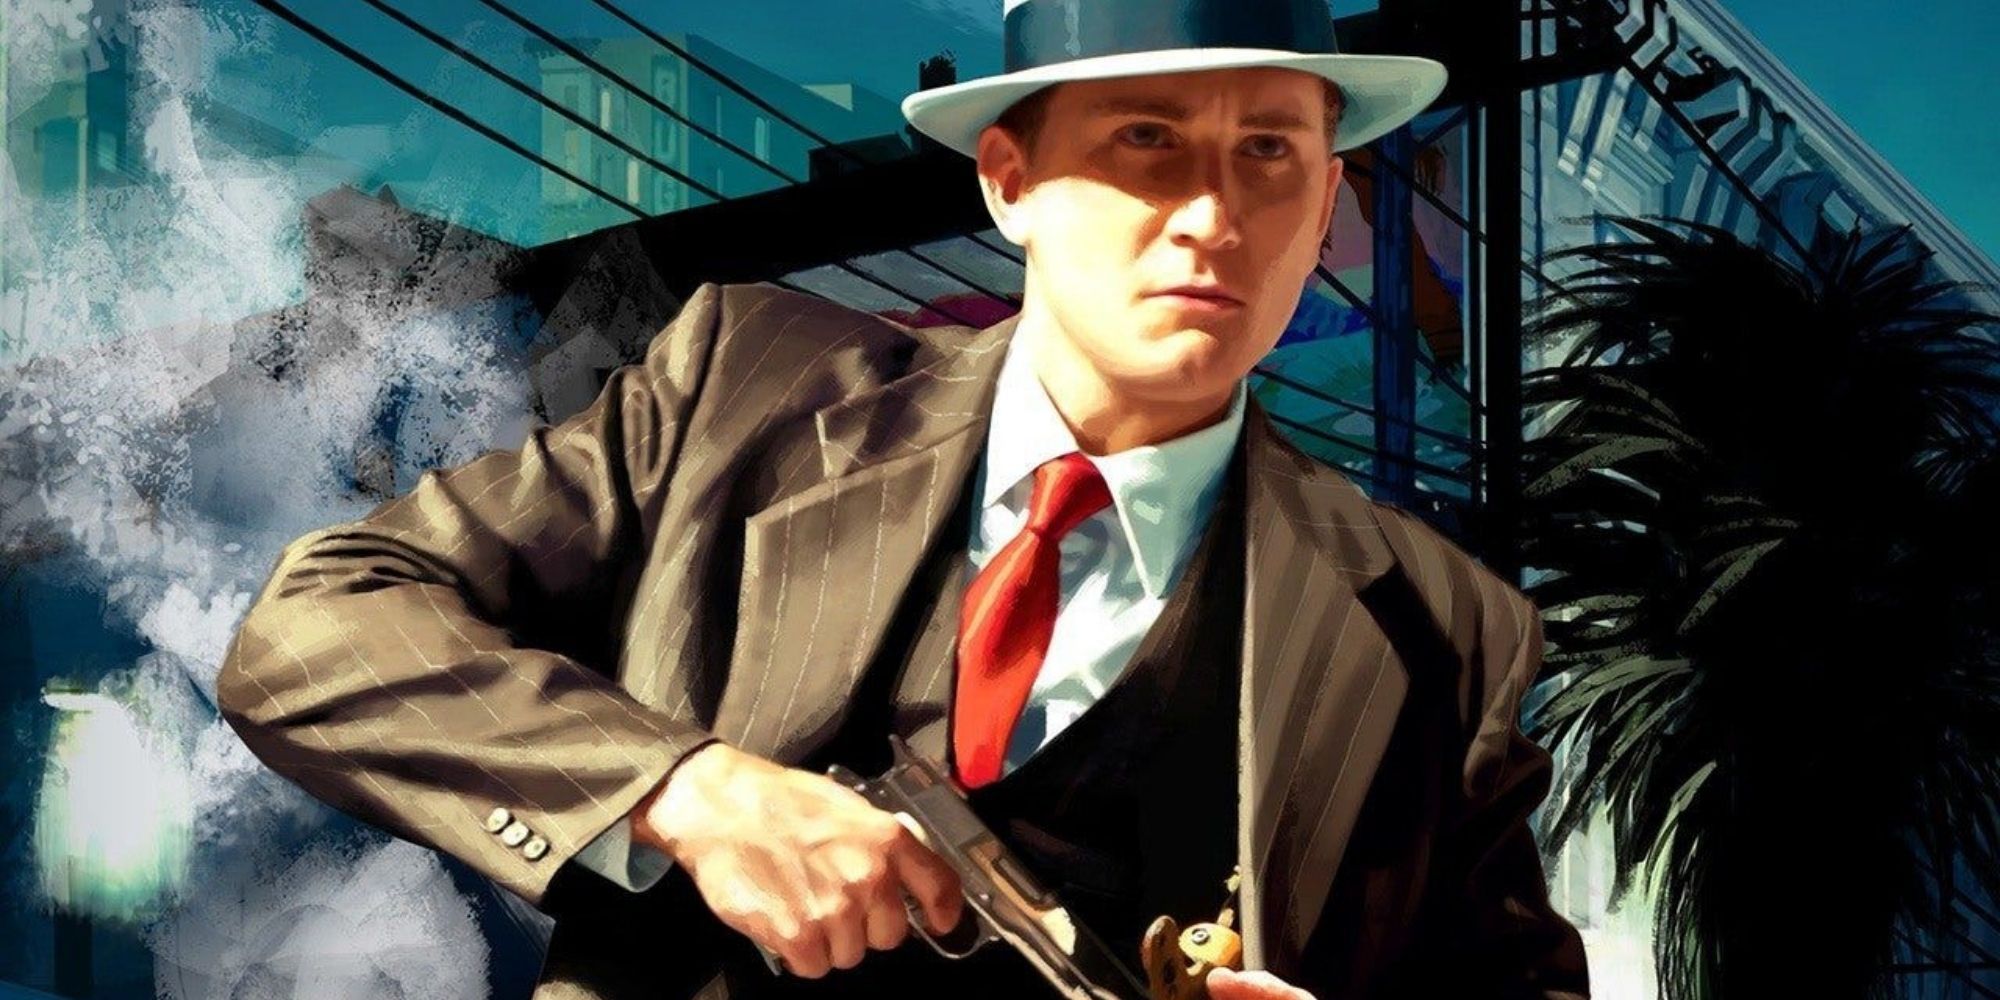 Cole Phelps pulls a gun from his jacket as smoke rises behind him